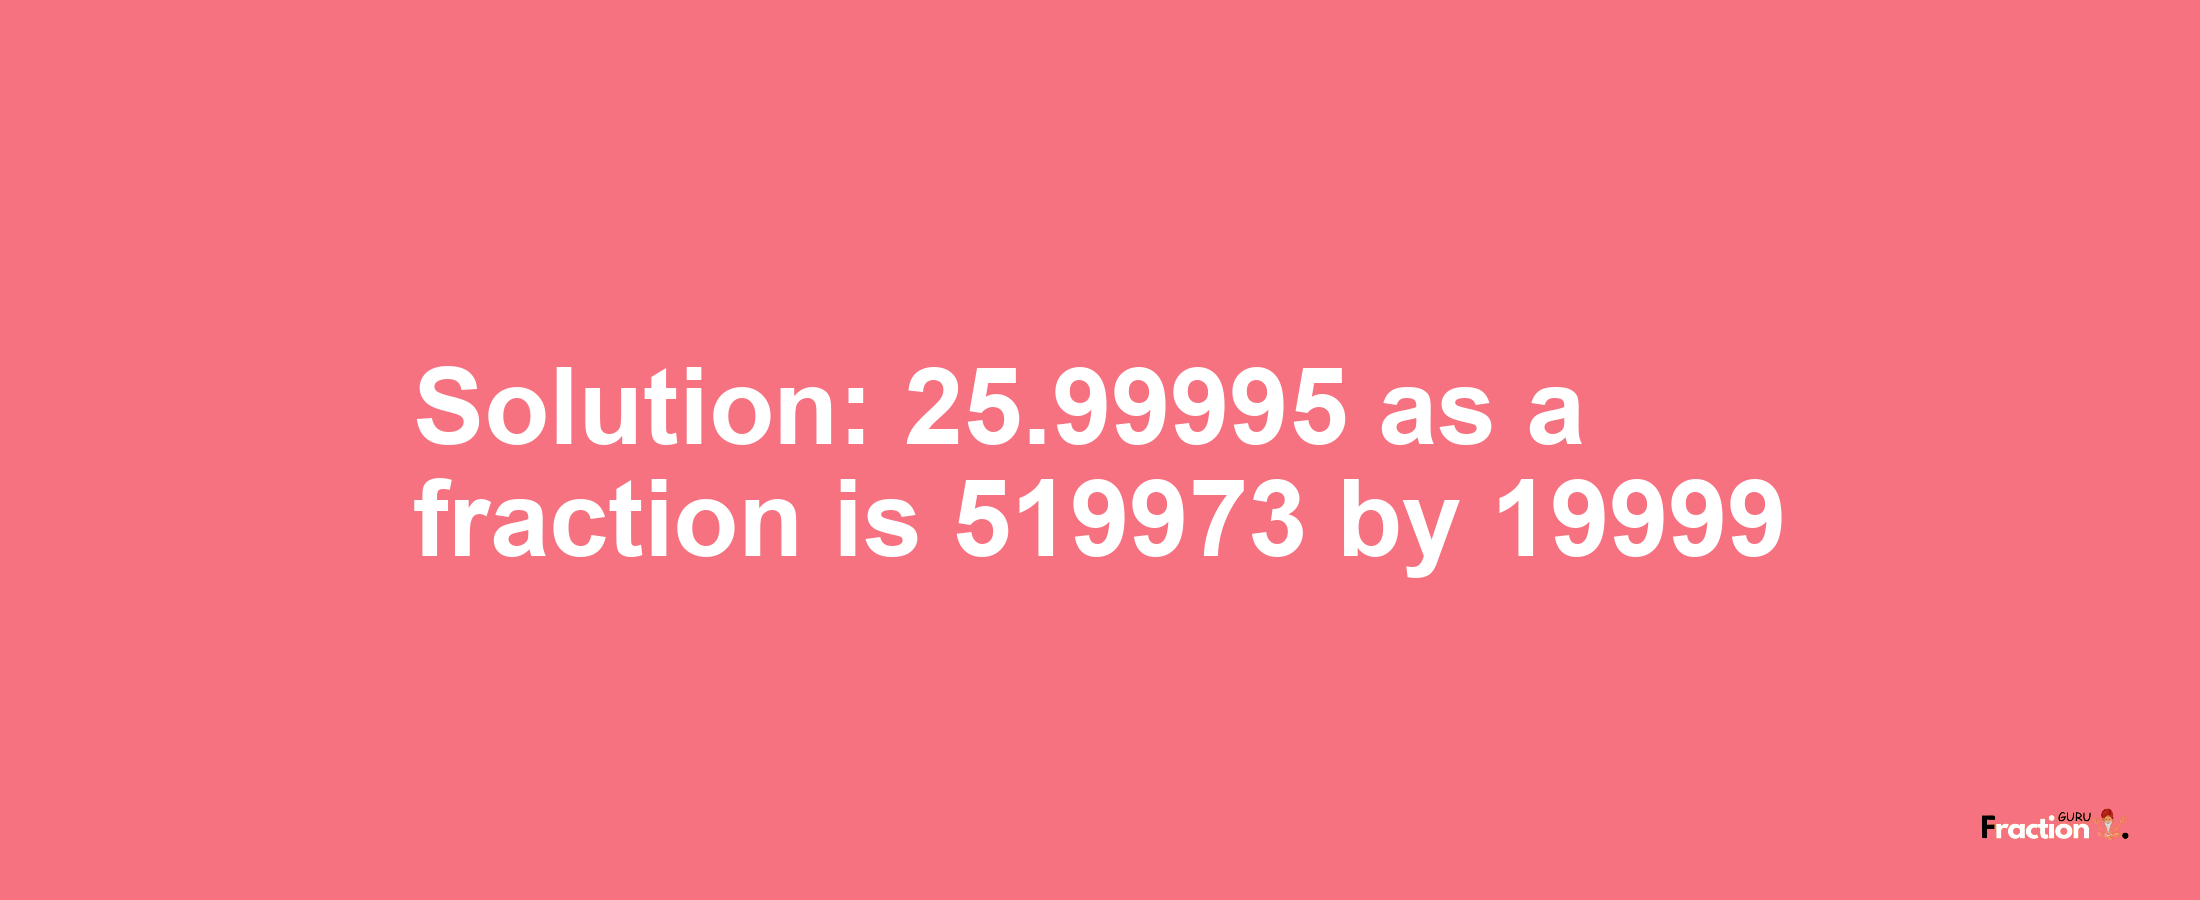 Solution:25.99995 as a fraction is 519973/19999